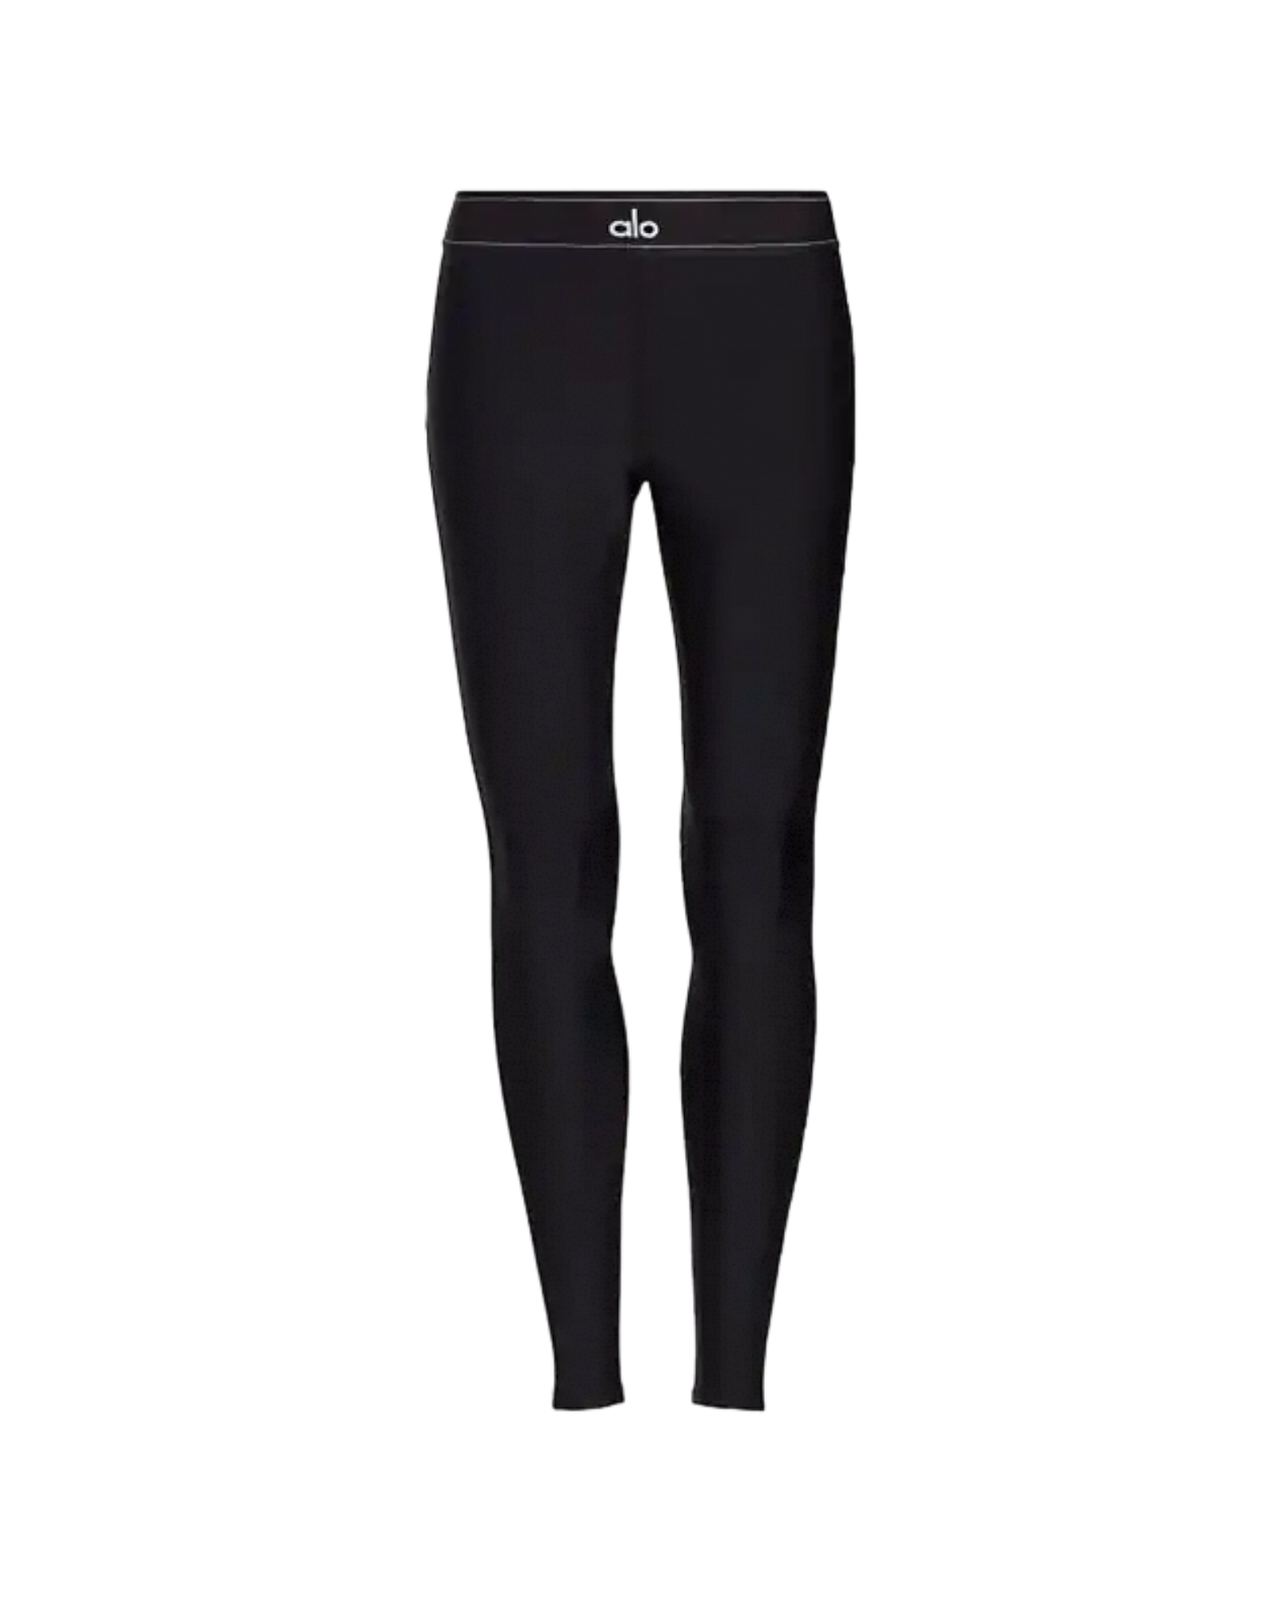 Airlift High-Waist Suit Up Legging - Anthracite/Black